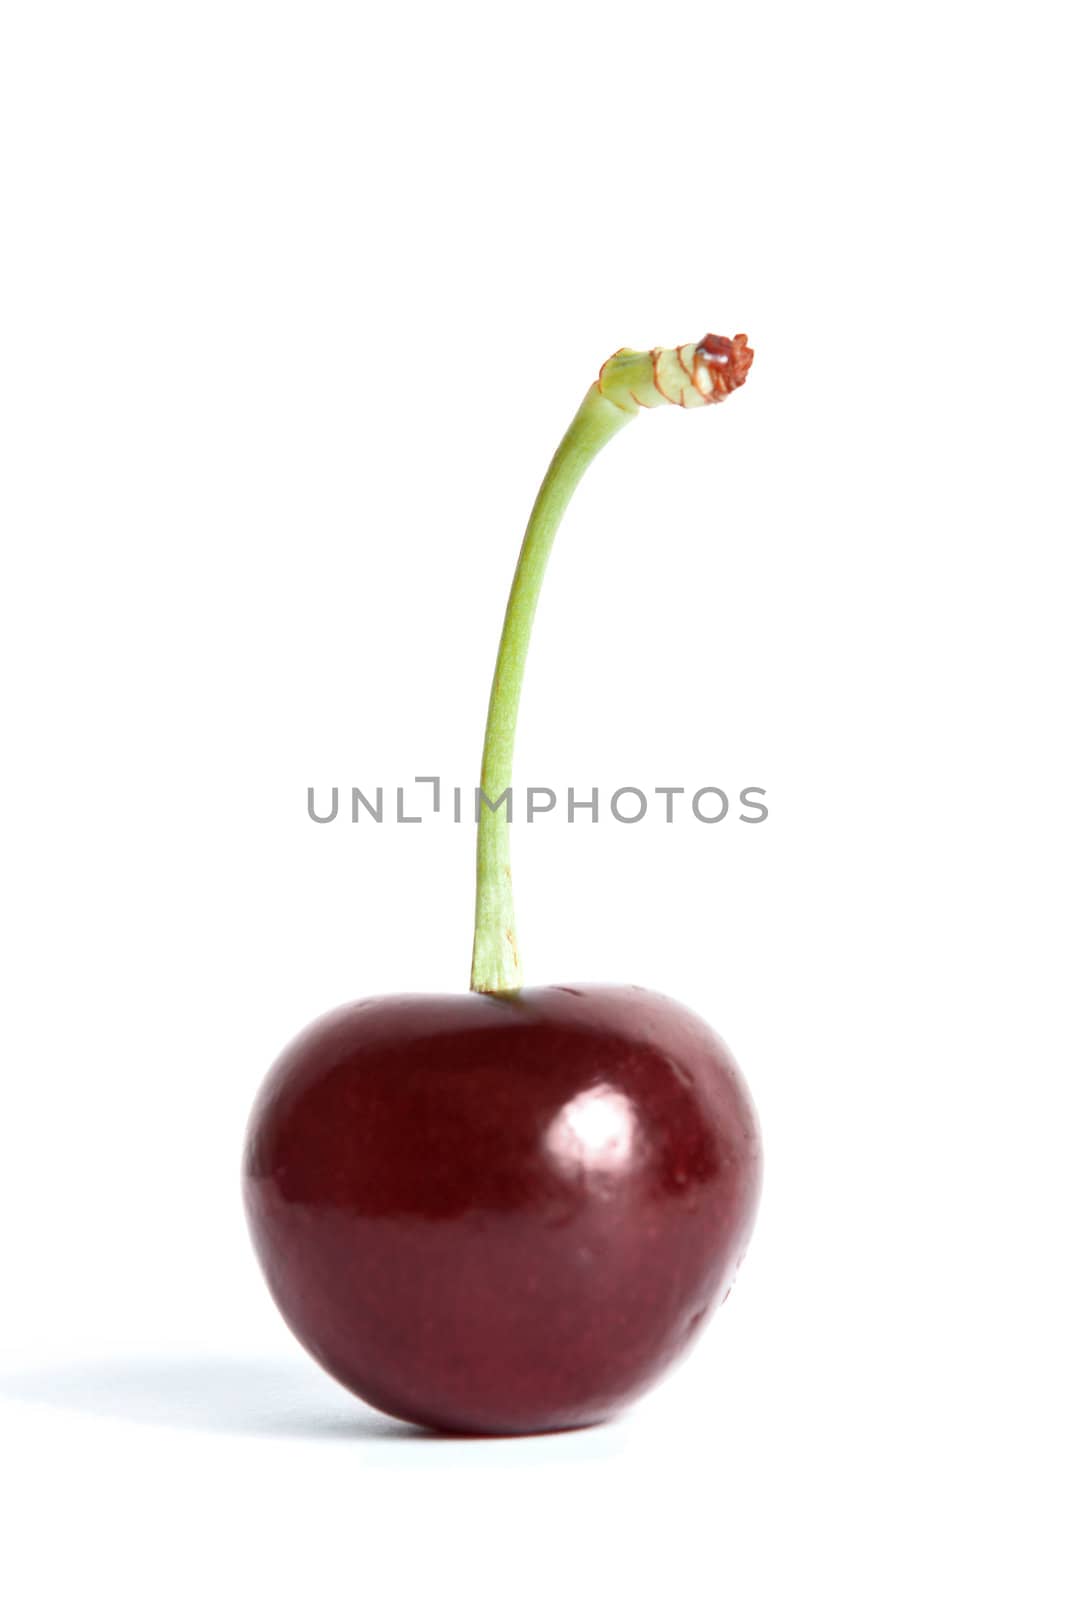 One cherry isolated on a white background.